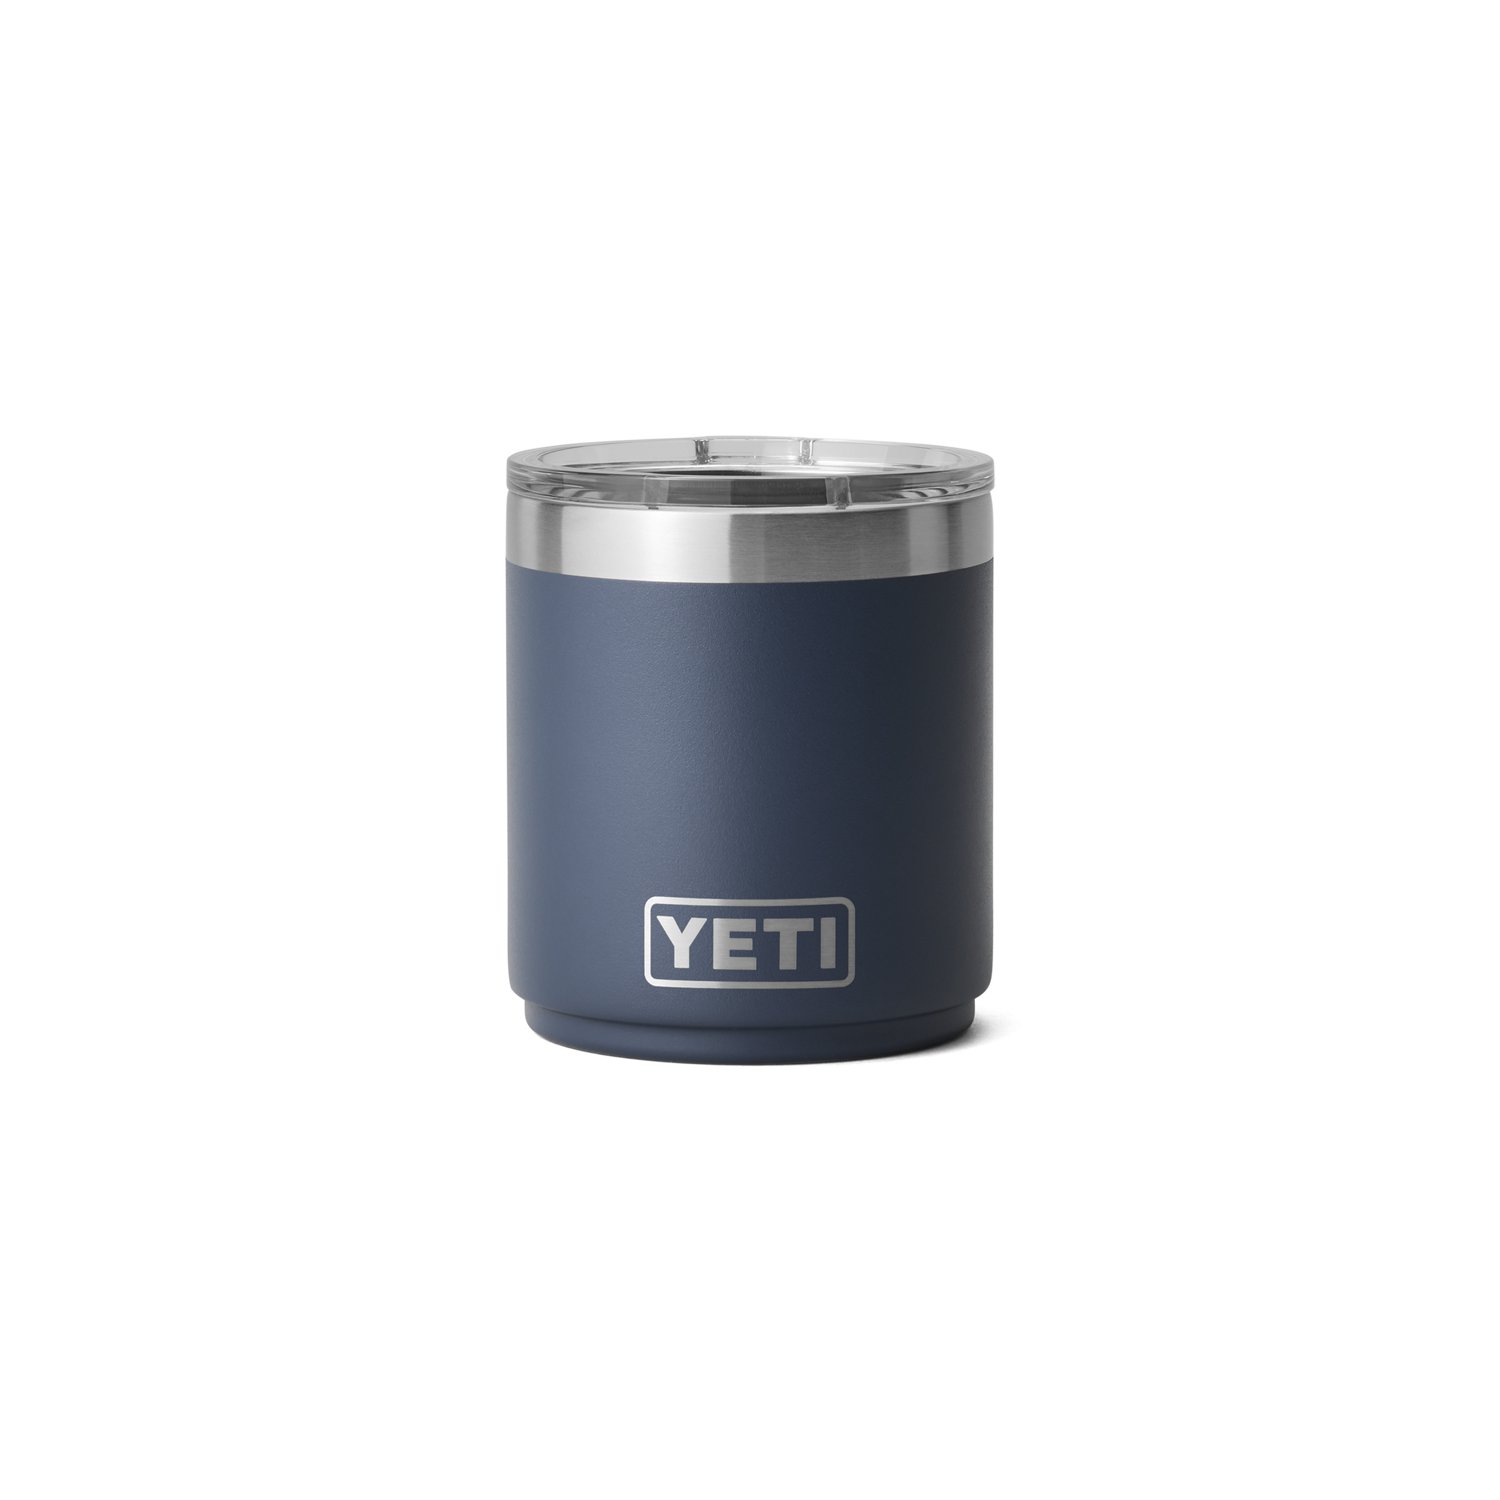 https://academy.scene7.com/is/image/academy//drinkware/yeti-rambler-10-oz-lowball-20-21071501960-blue/ecf3a96af63941118f03e2dbb2505d6c?$pdp-mobile-gallery-ng$